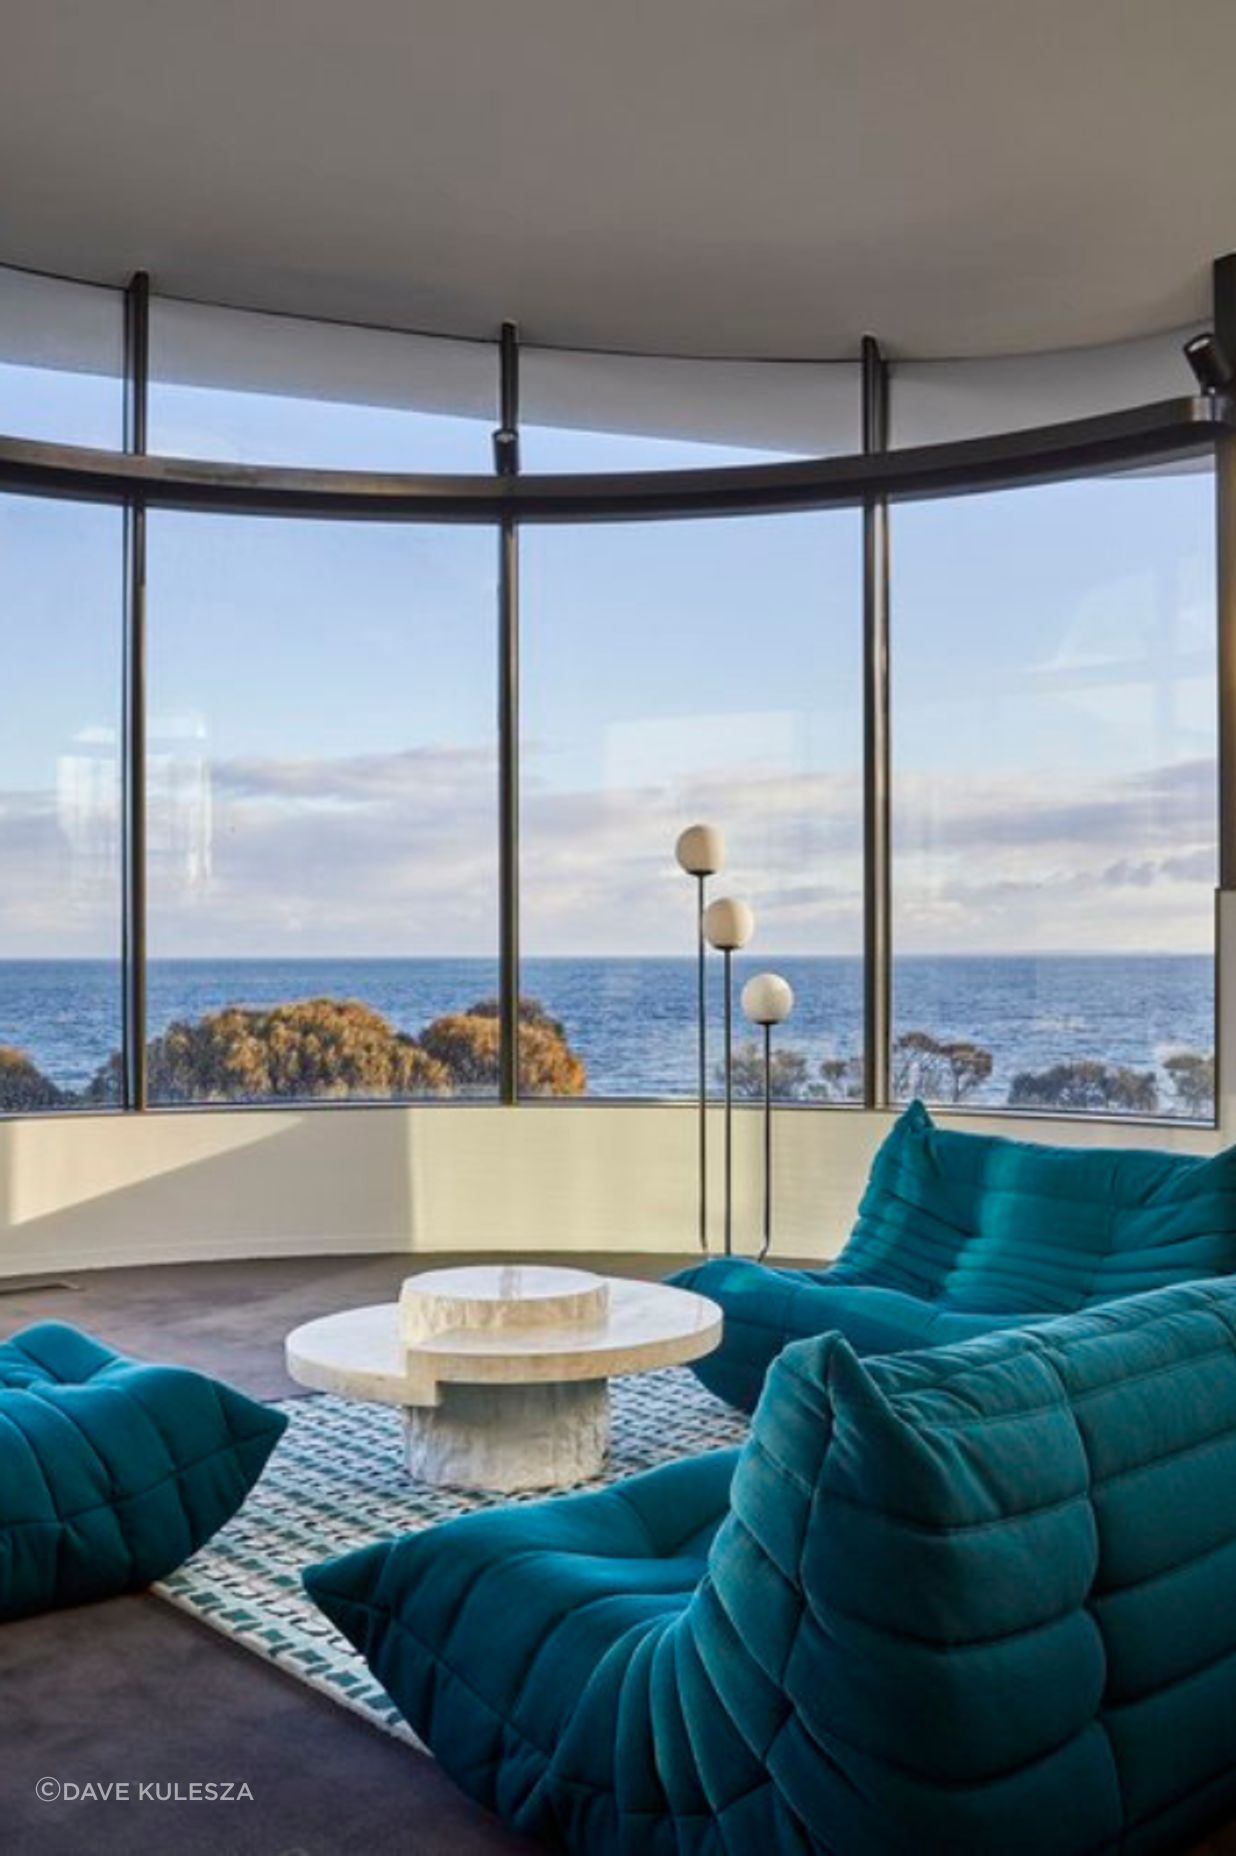 Curved windows provide 270 degree views of the bay.